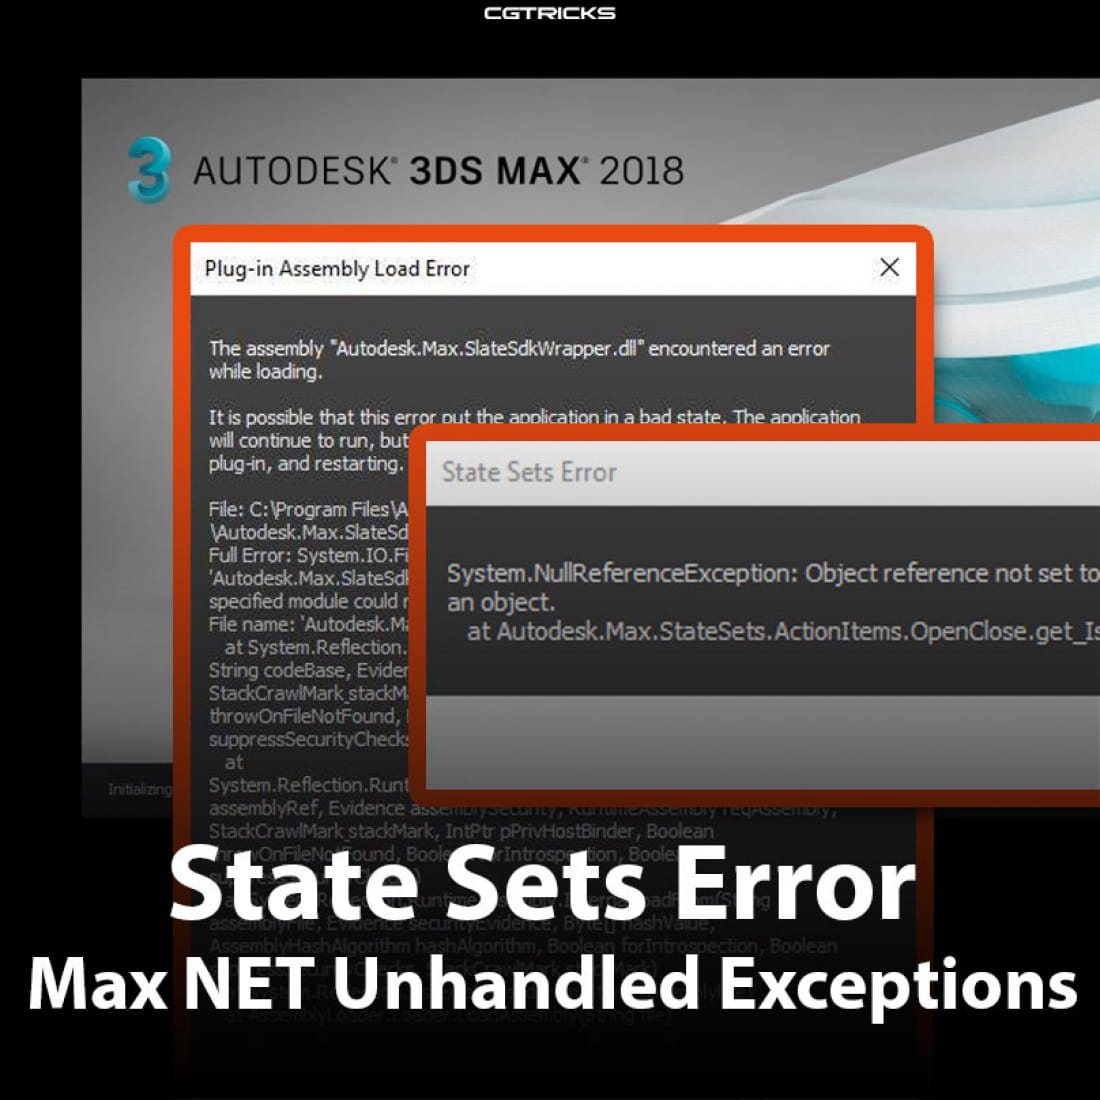 state-sets-error-and-max-net-unhandled-exceptions-how-to-fix-it-